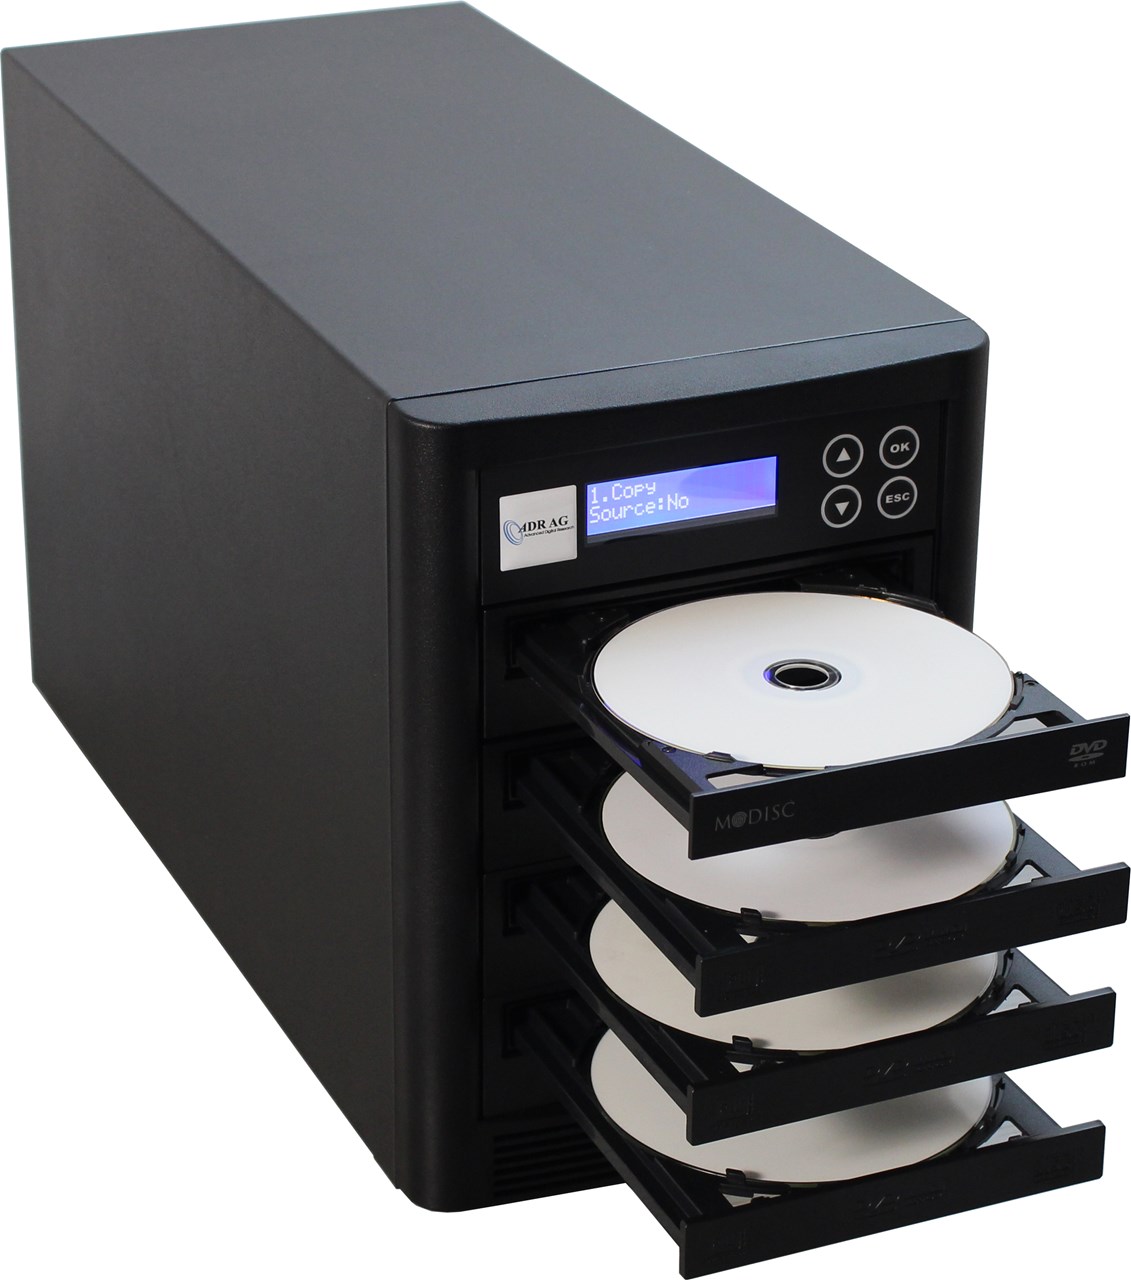 Disc Duplicator Adr Whirlwind With 4 Cd Dvd Drives Available From Adr Or Through Adr Distributors In Europe Australia America And Asia Adr Ag Advanced Digital Research Cd Dvd Copy